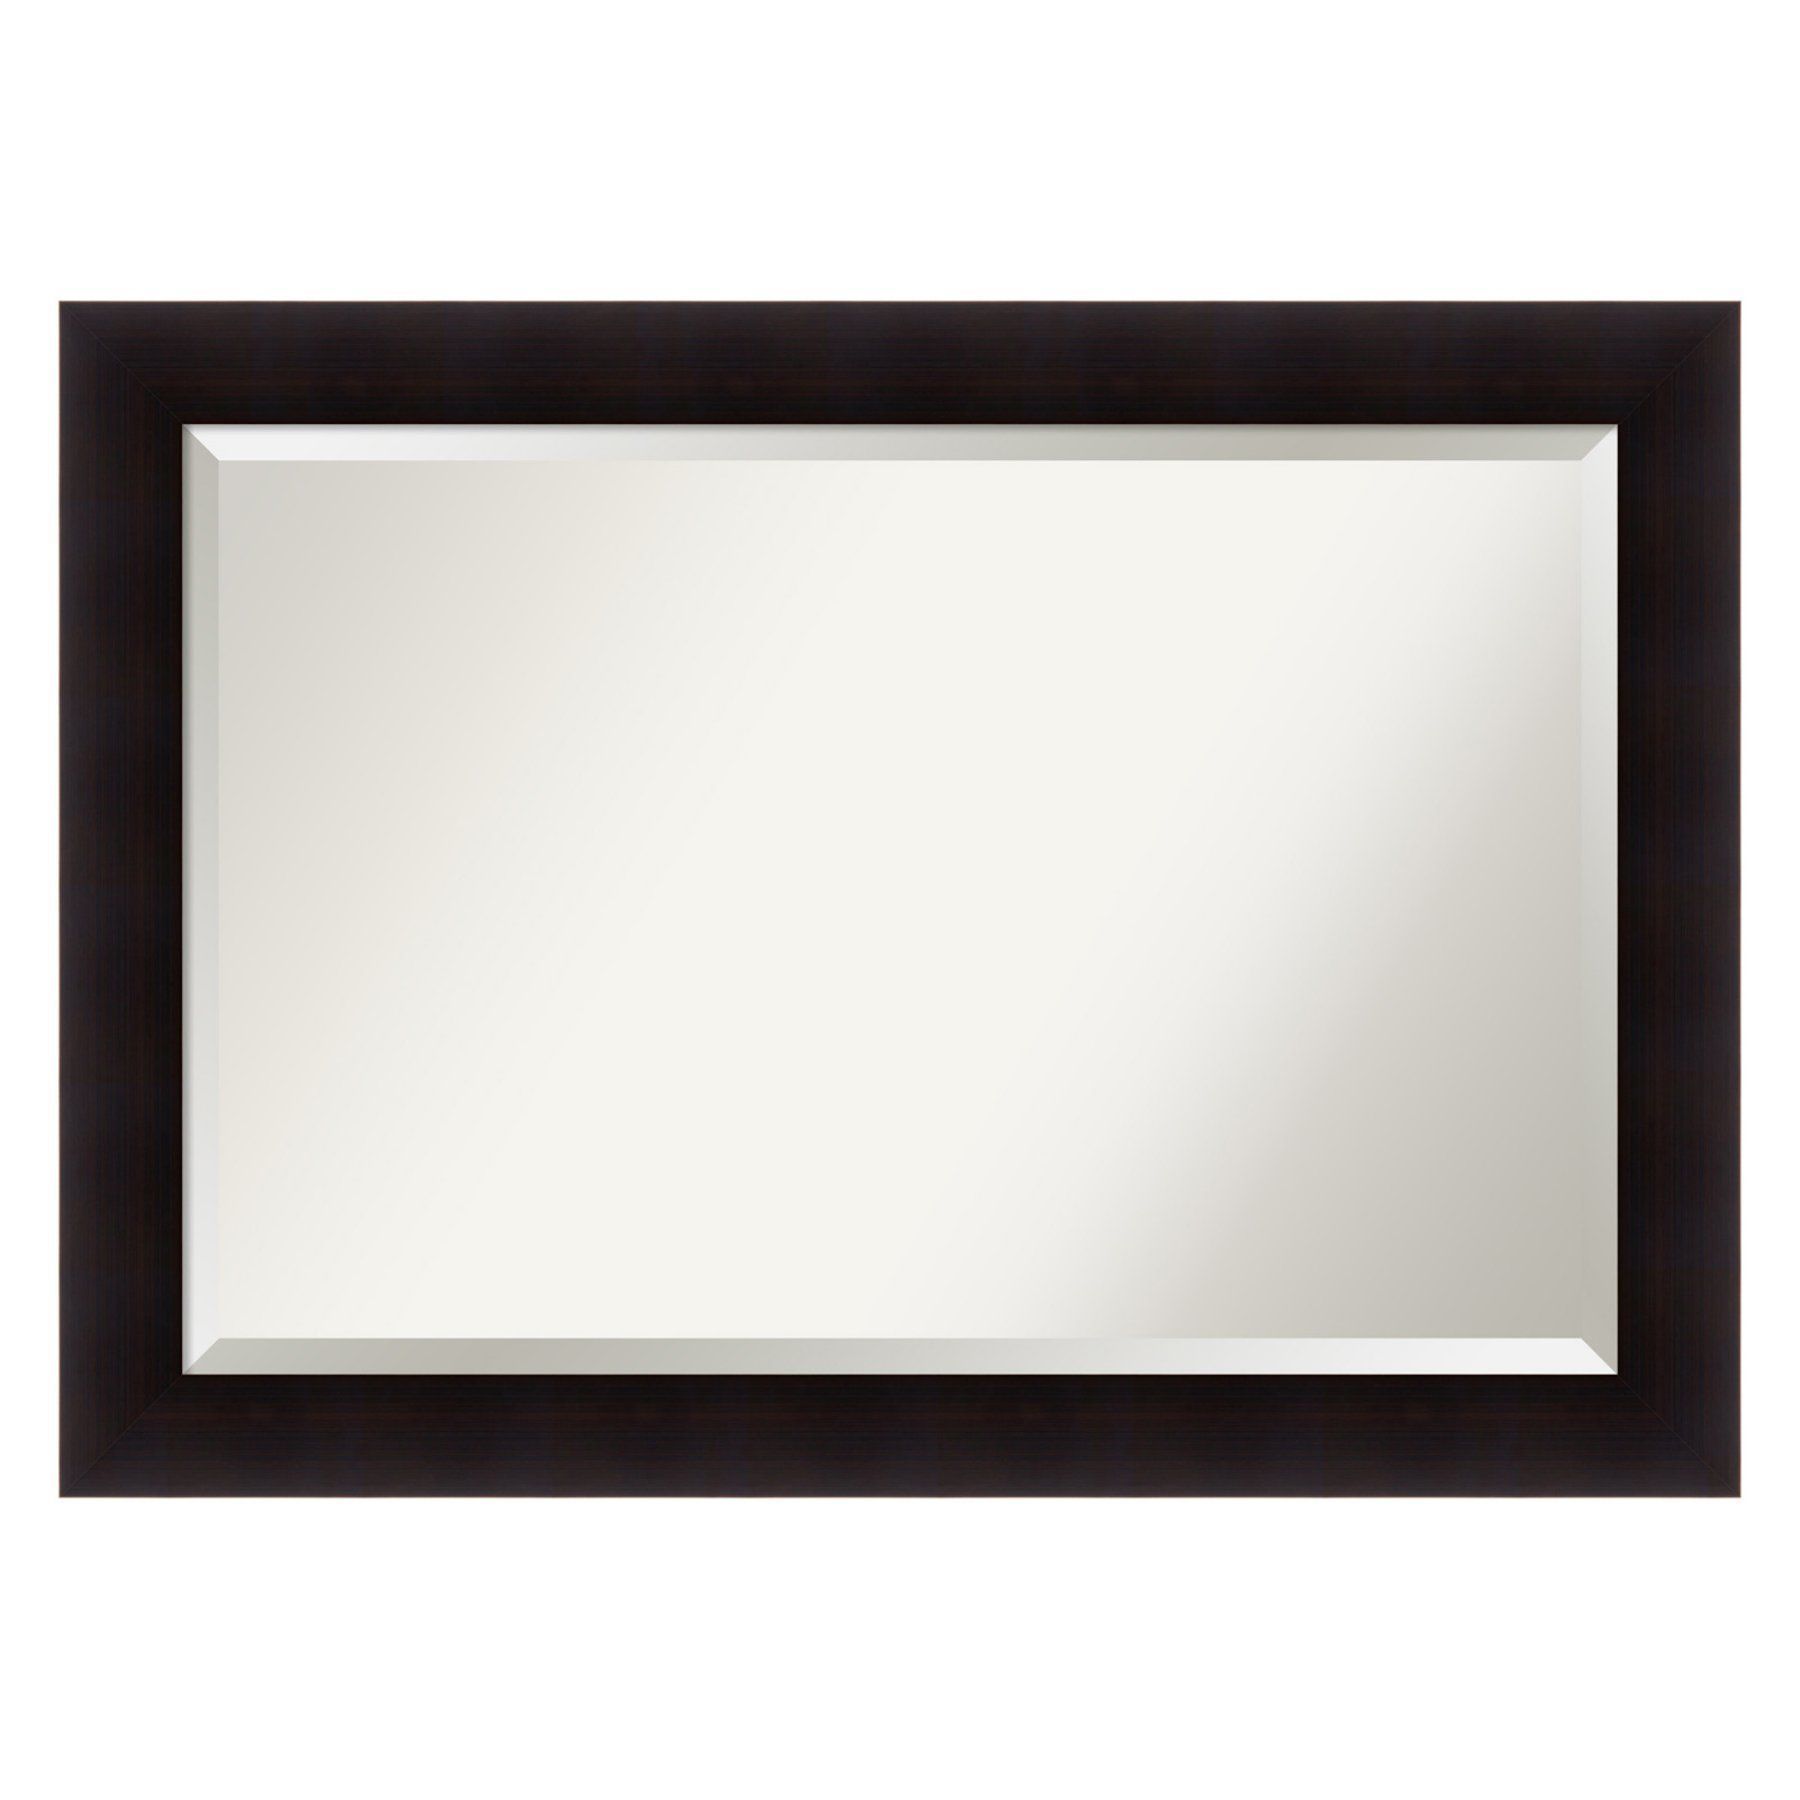 Amanti Art Portico Bathroom Mirror – Dsw3941600 | Products Within Peetz Modern Rustic Accent Mirrors (View 14 of 20)